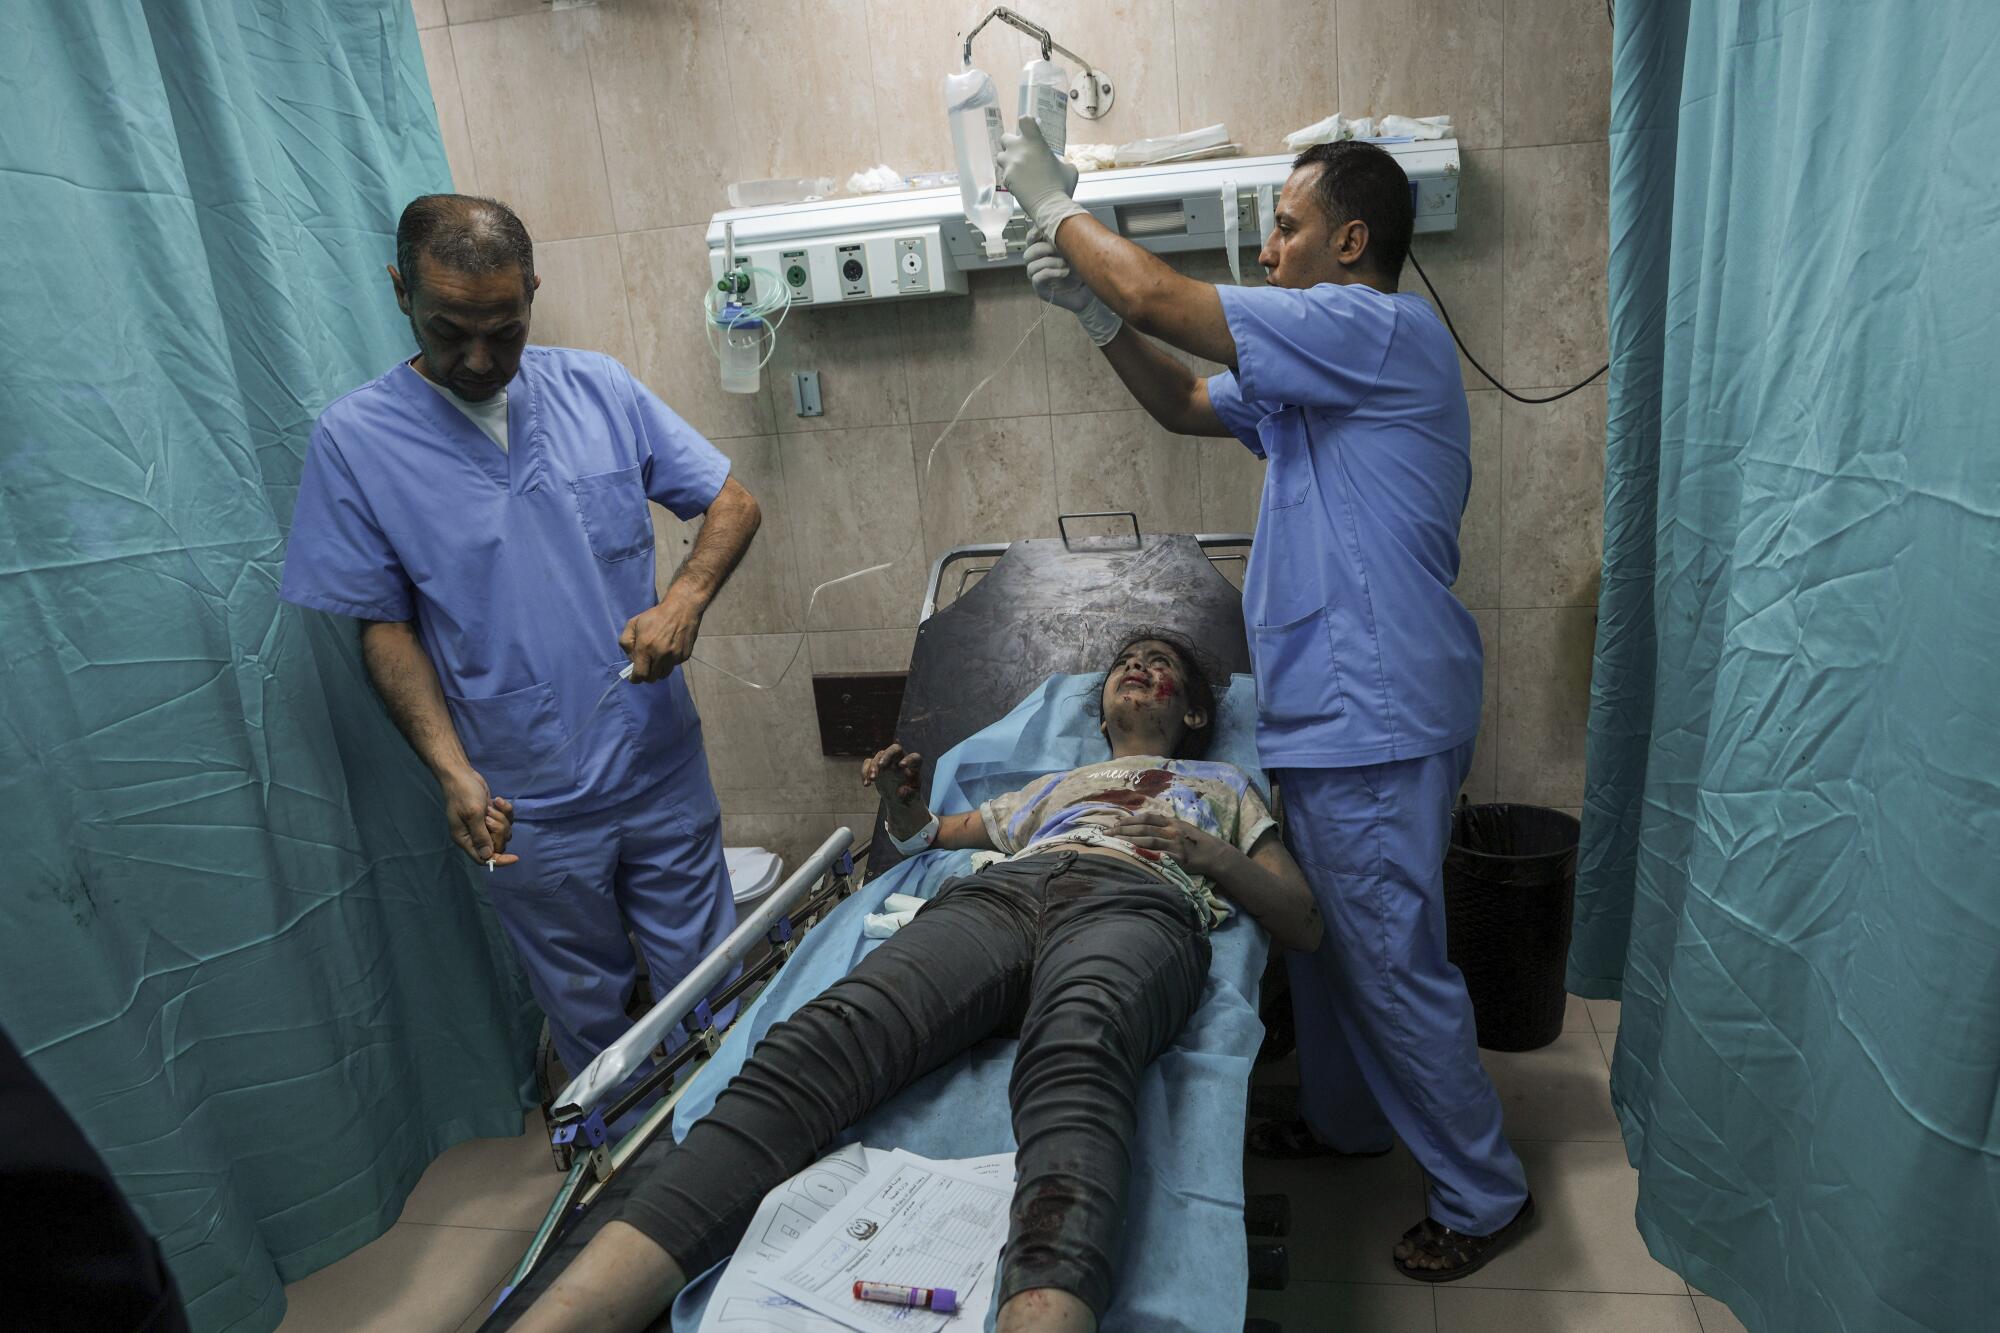 A Palestinian girl lies wounded in a hospital bay as two people give her medical attention. 